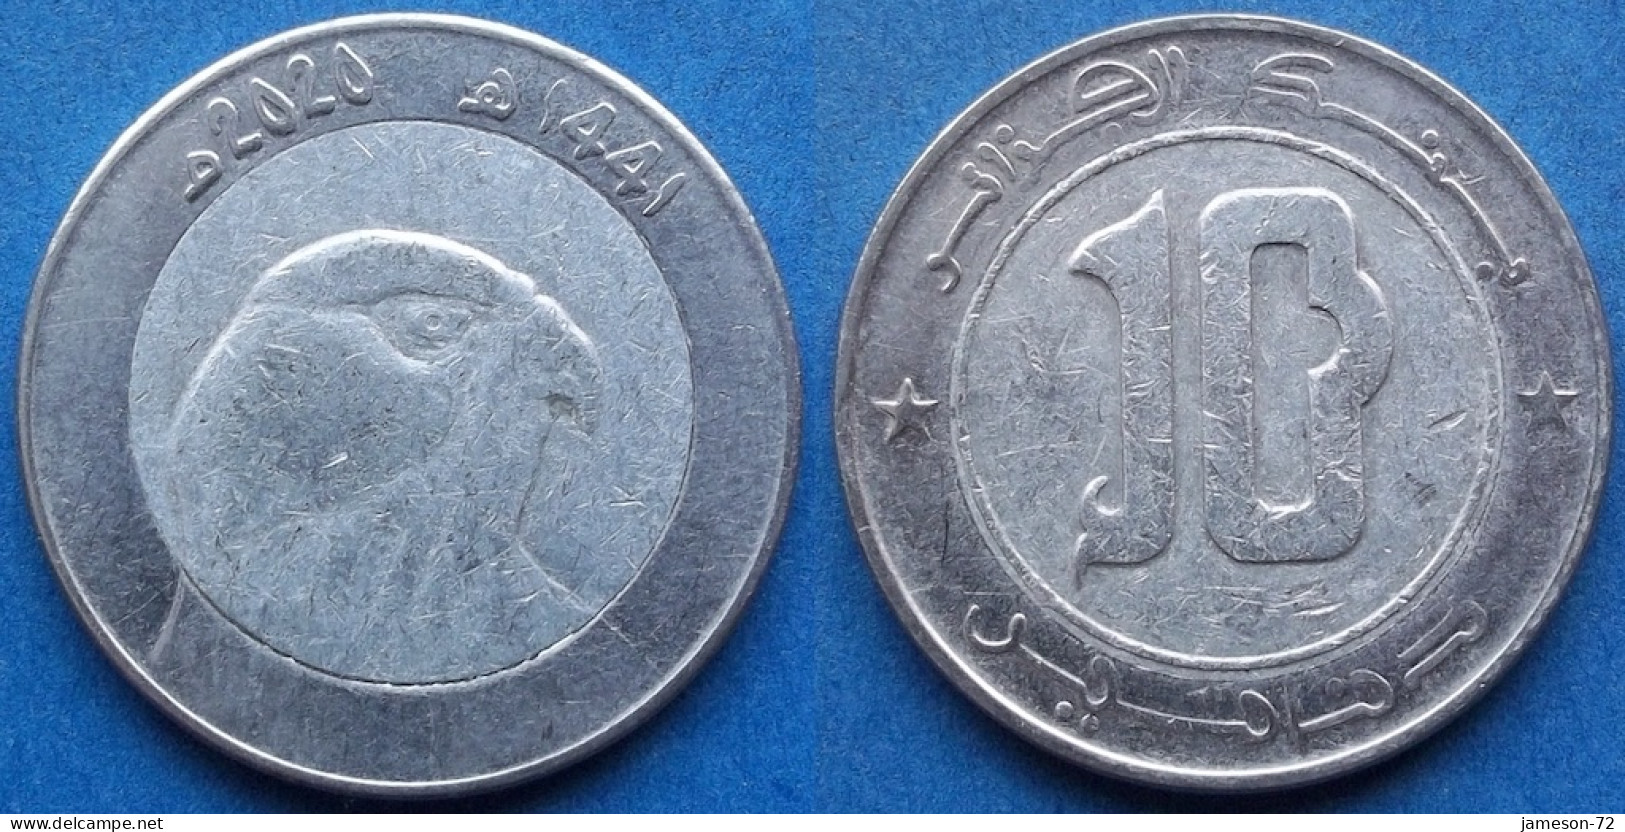 ALGERIA - 10 Dinars AH1441 2020AD "Barbary Falcon" KM# 124 Independent (1962) - Edelweiss Coins - Argelia